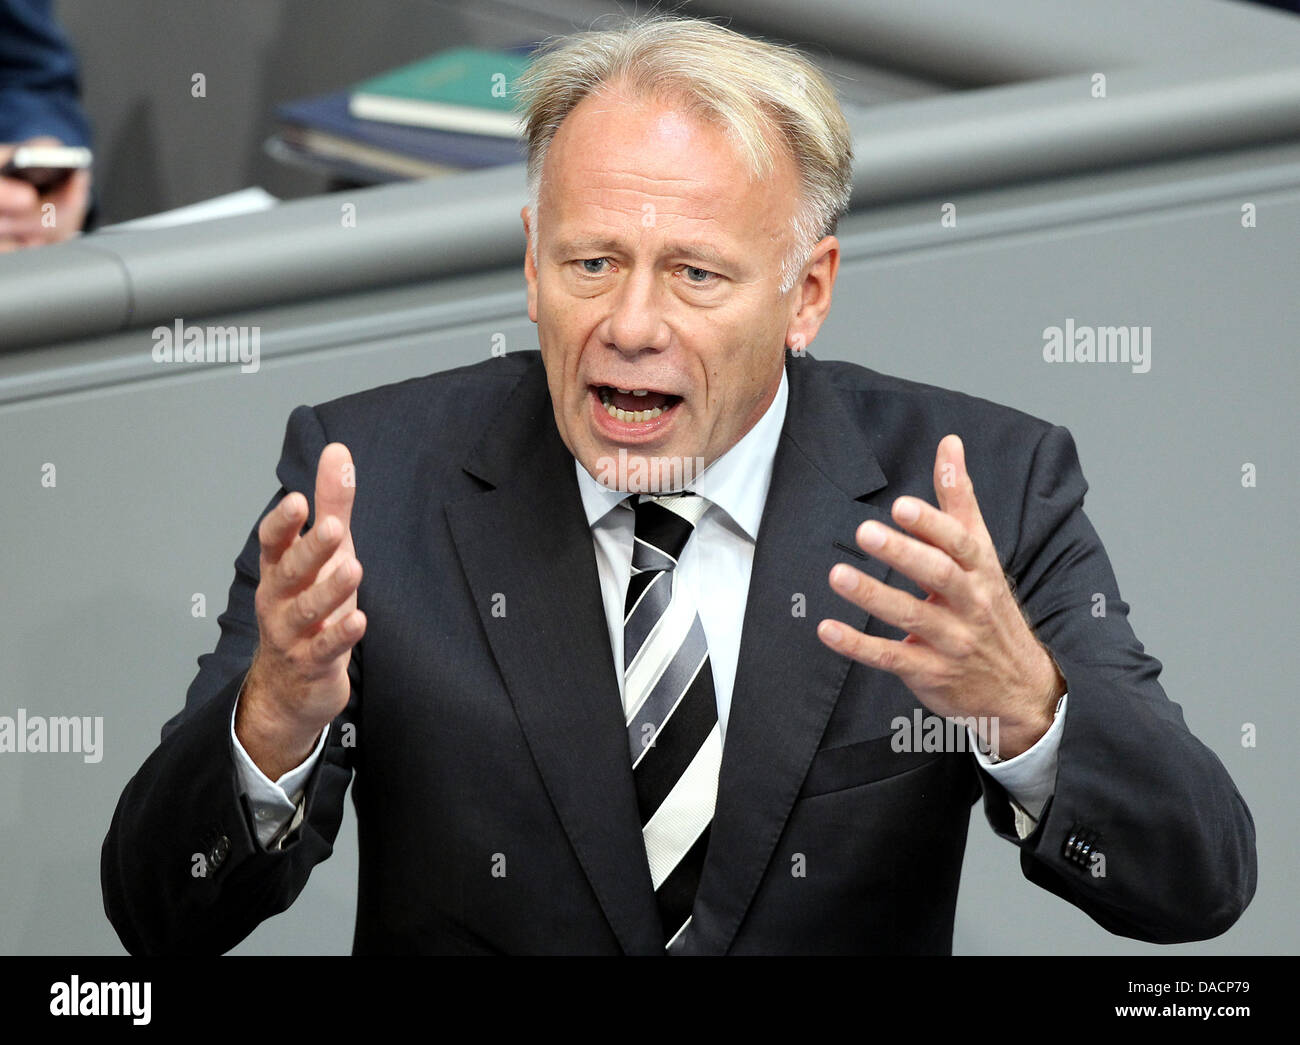 Juergen Trittin, chairman of The Greens, speaks in the German Bundestag, Berlin, Germany, 29 September 2011. The Bundestag will have a roll-call vote on the Euro rescue package today. Photo: Wolfgang Kumm Stock Photo